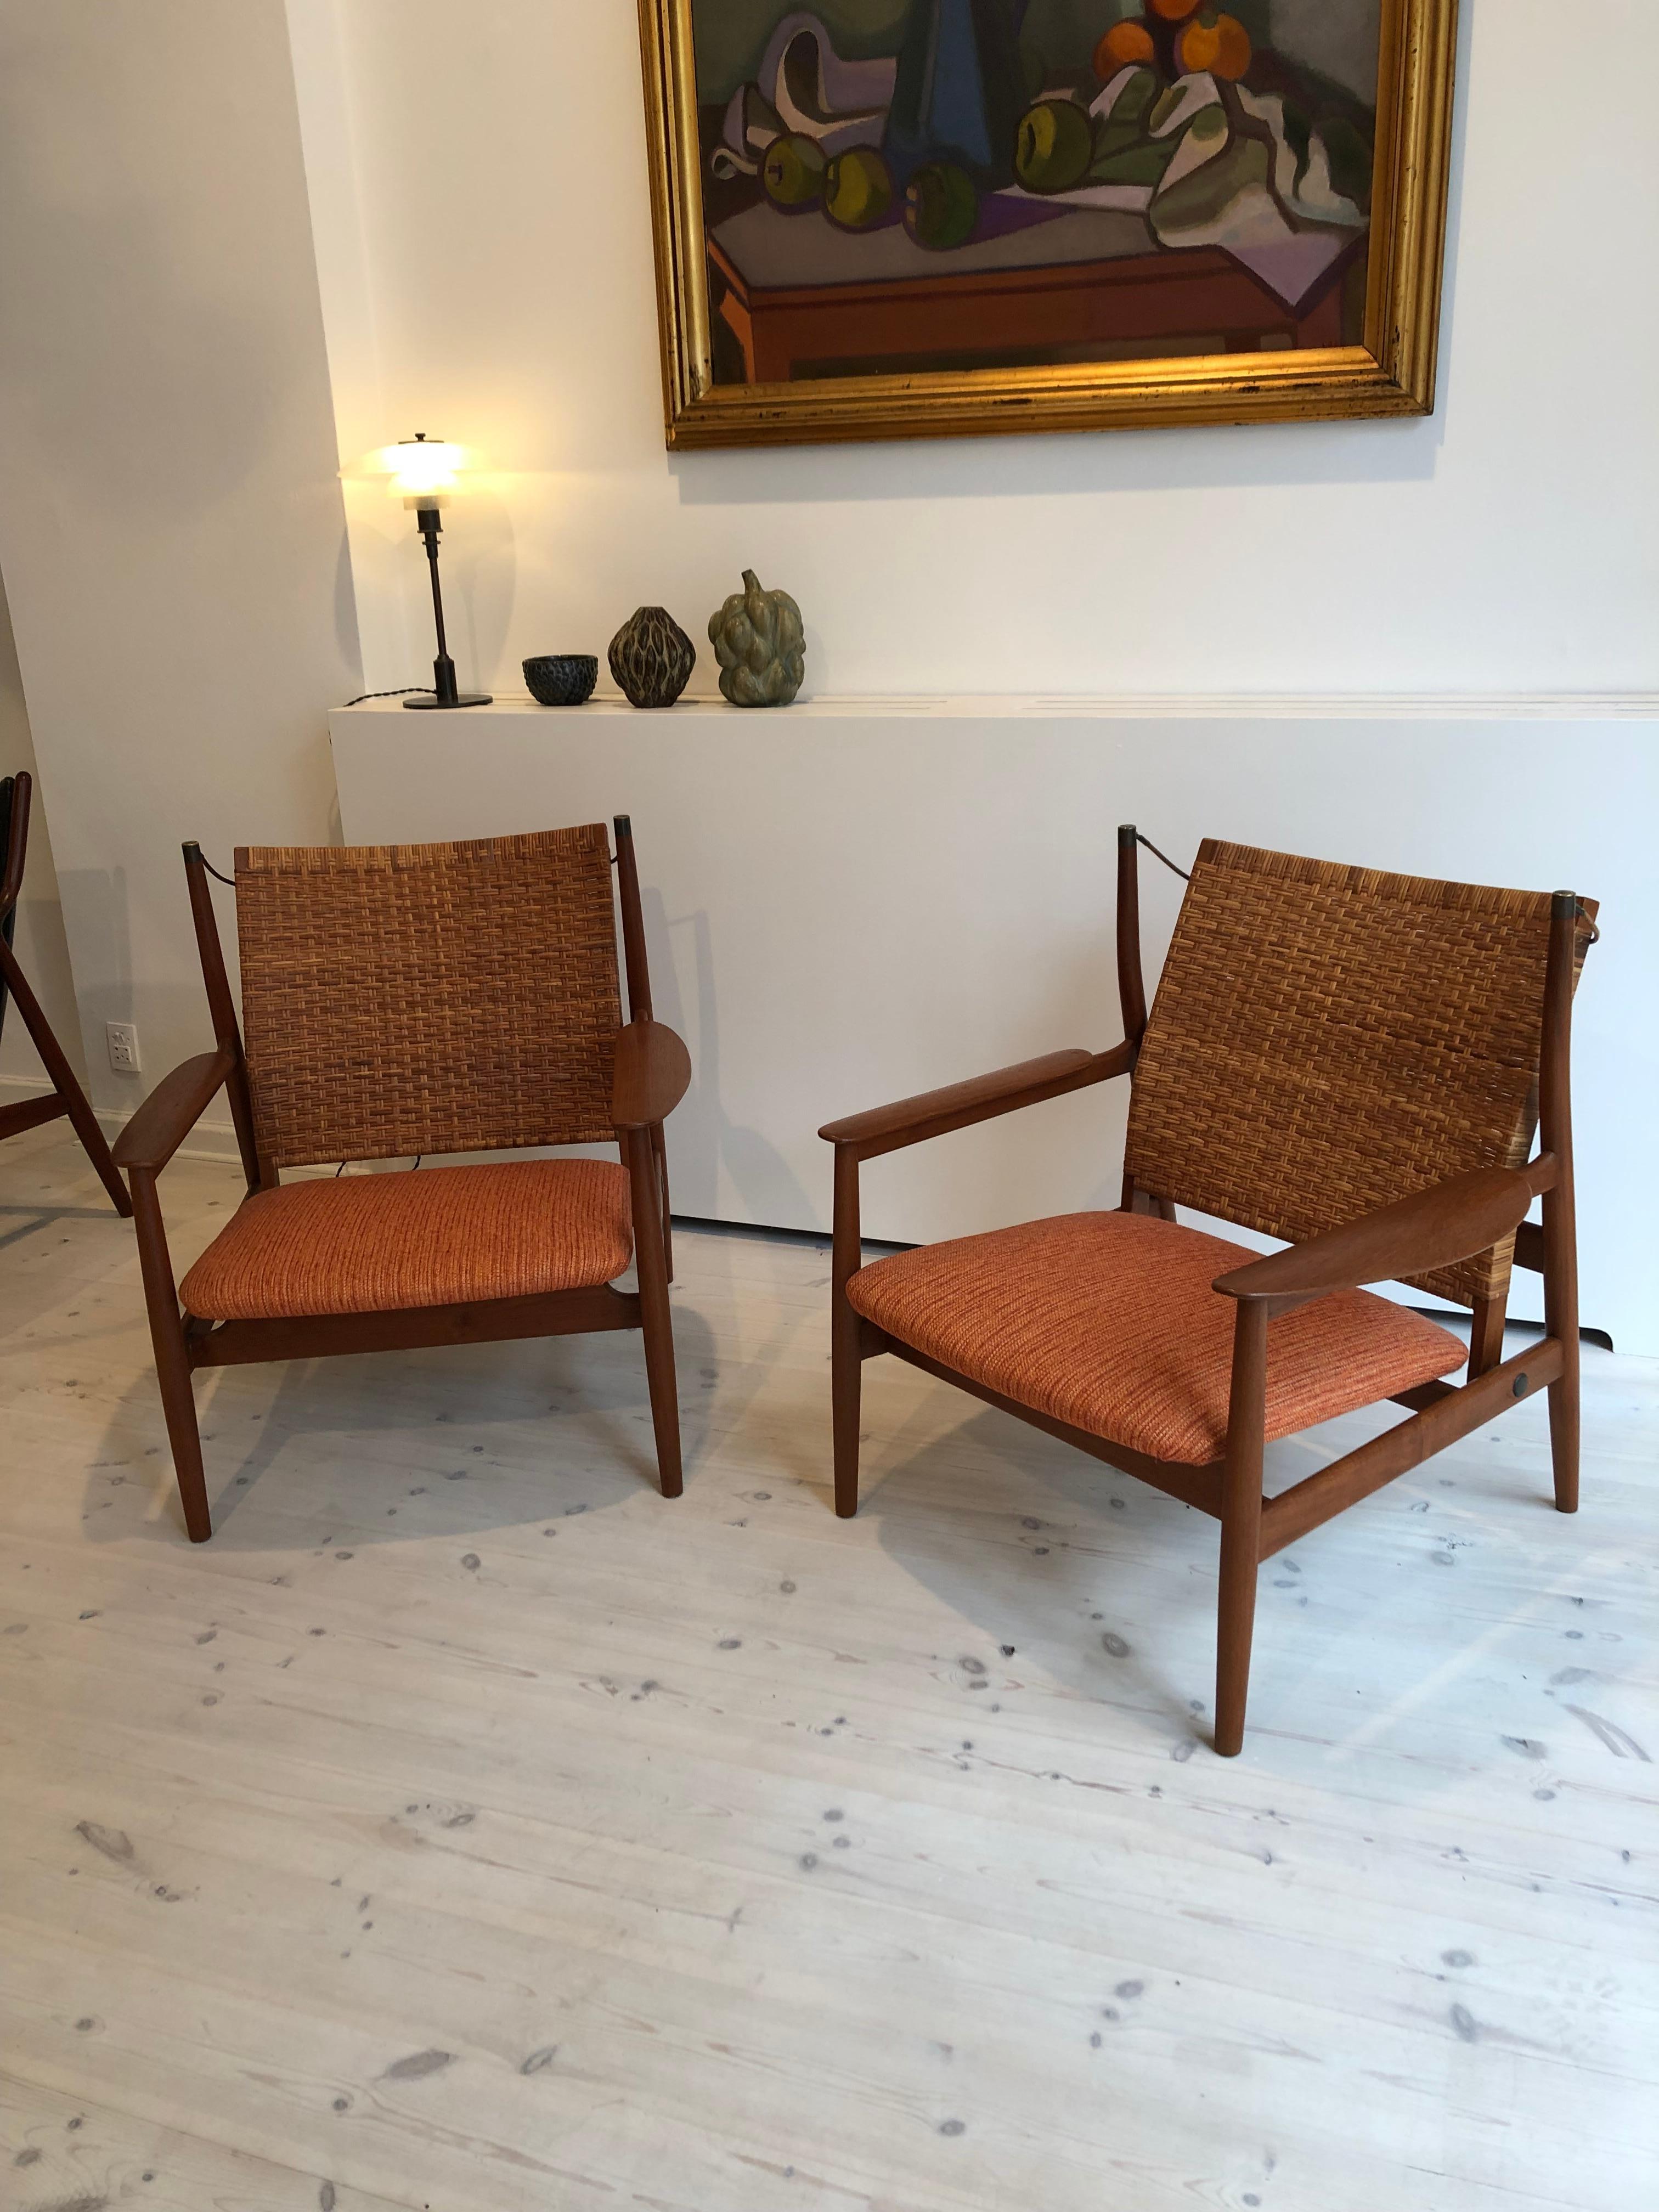 Finn Juhl Rare Pair of NV55 Armchairs in Teak and Cane for Niels Vodder, 1955 6